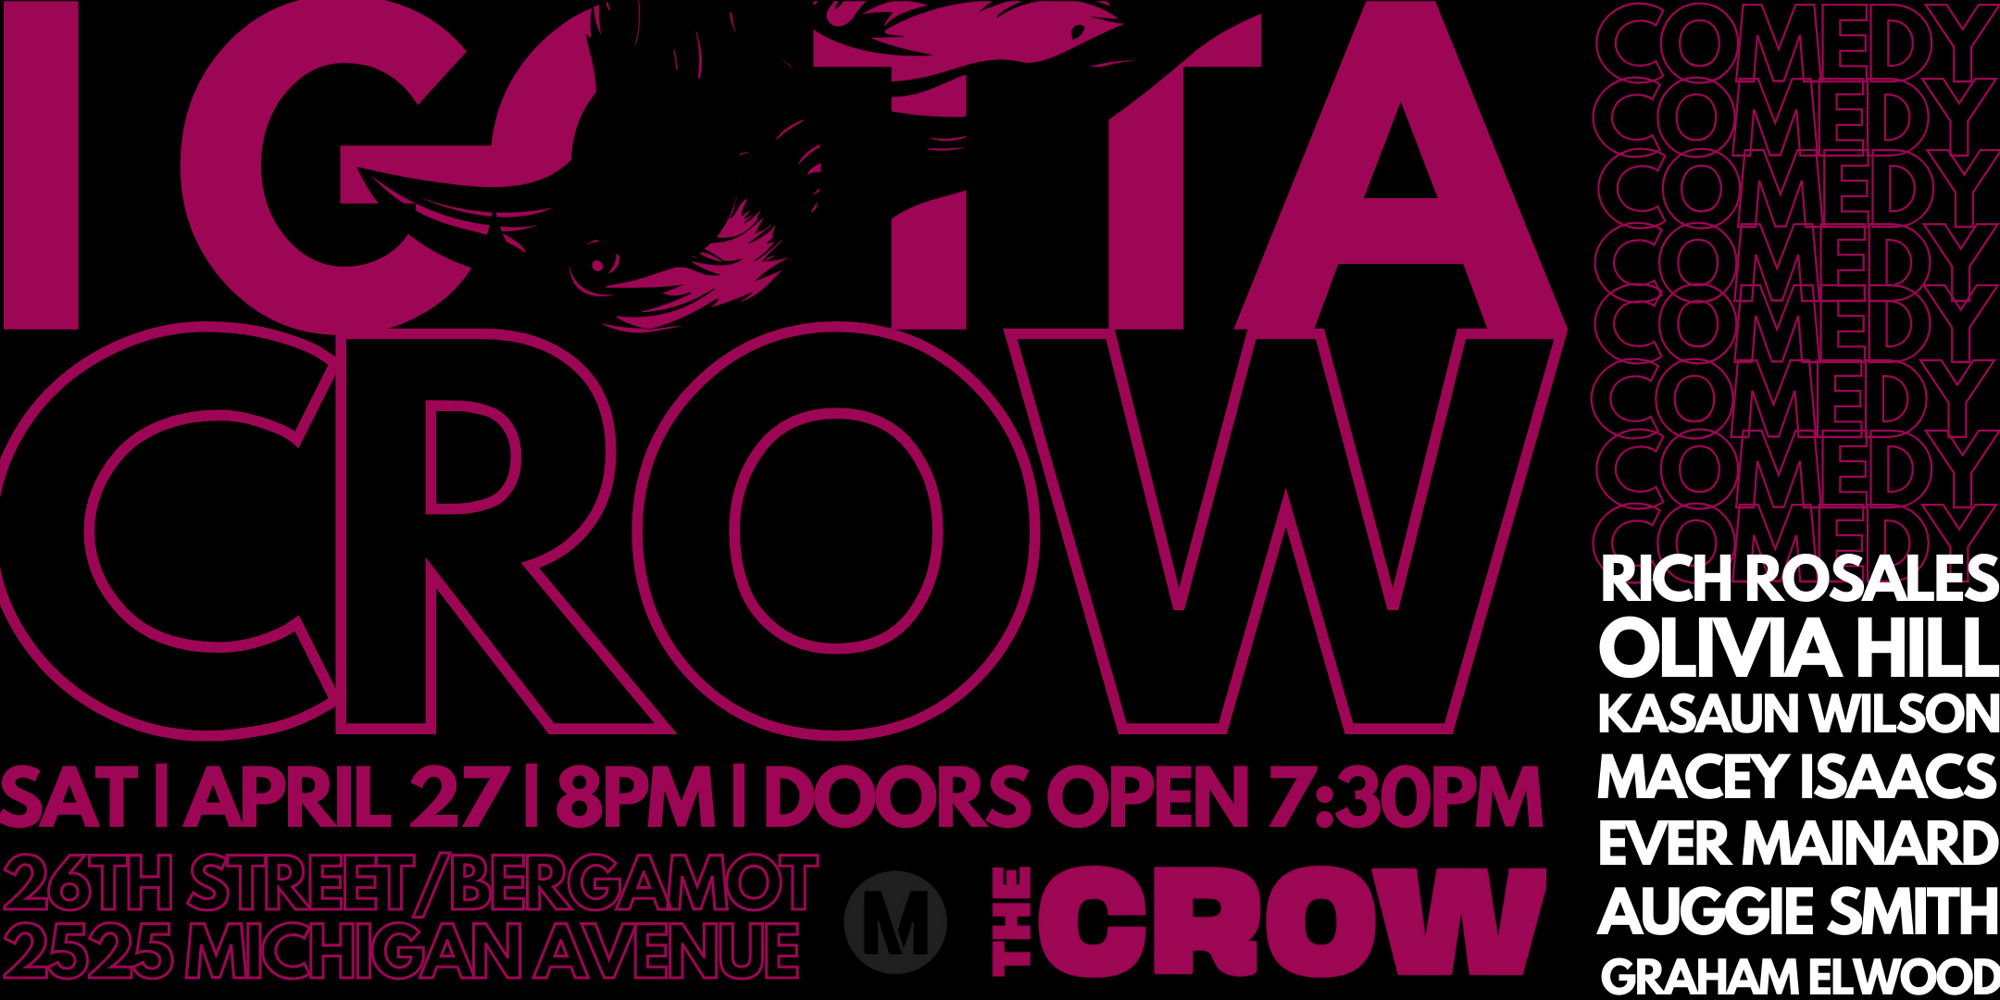 I Gotta Crow: The Best Stand-Up at The Crow promotional image